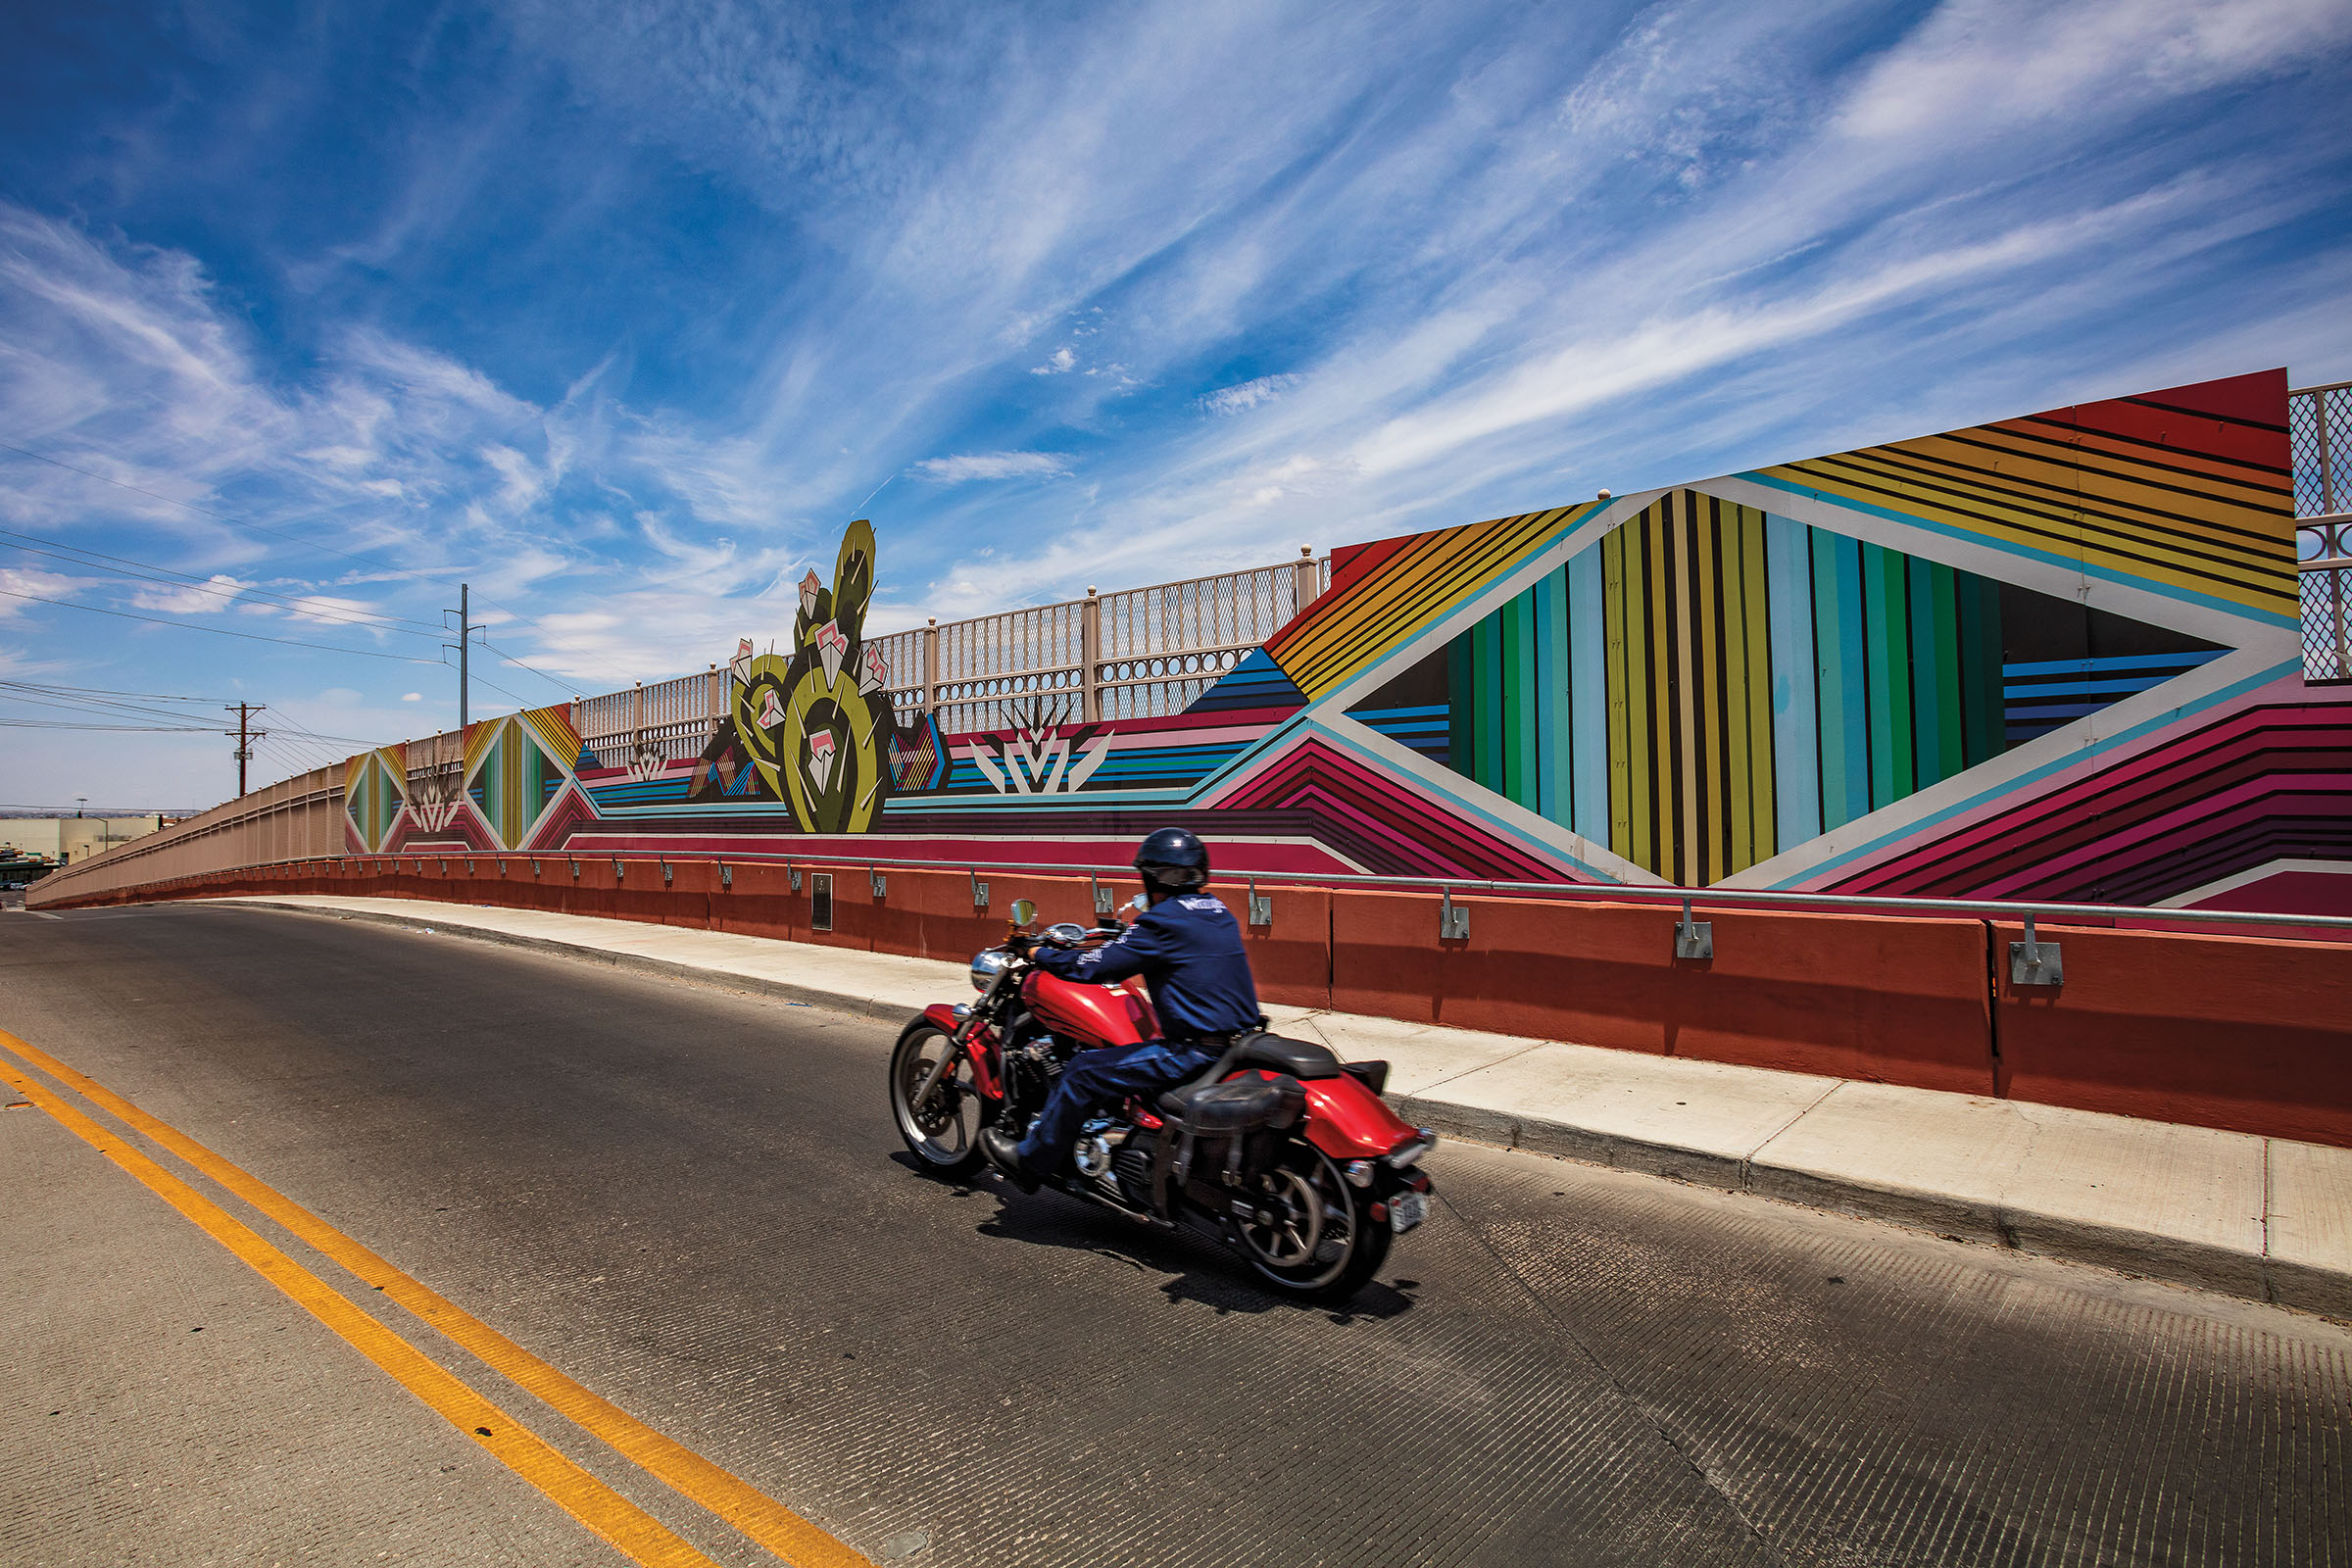 A motorcycle drives by a mural-like sculpture with bright colors along the side of a bridge